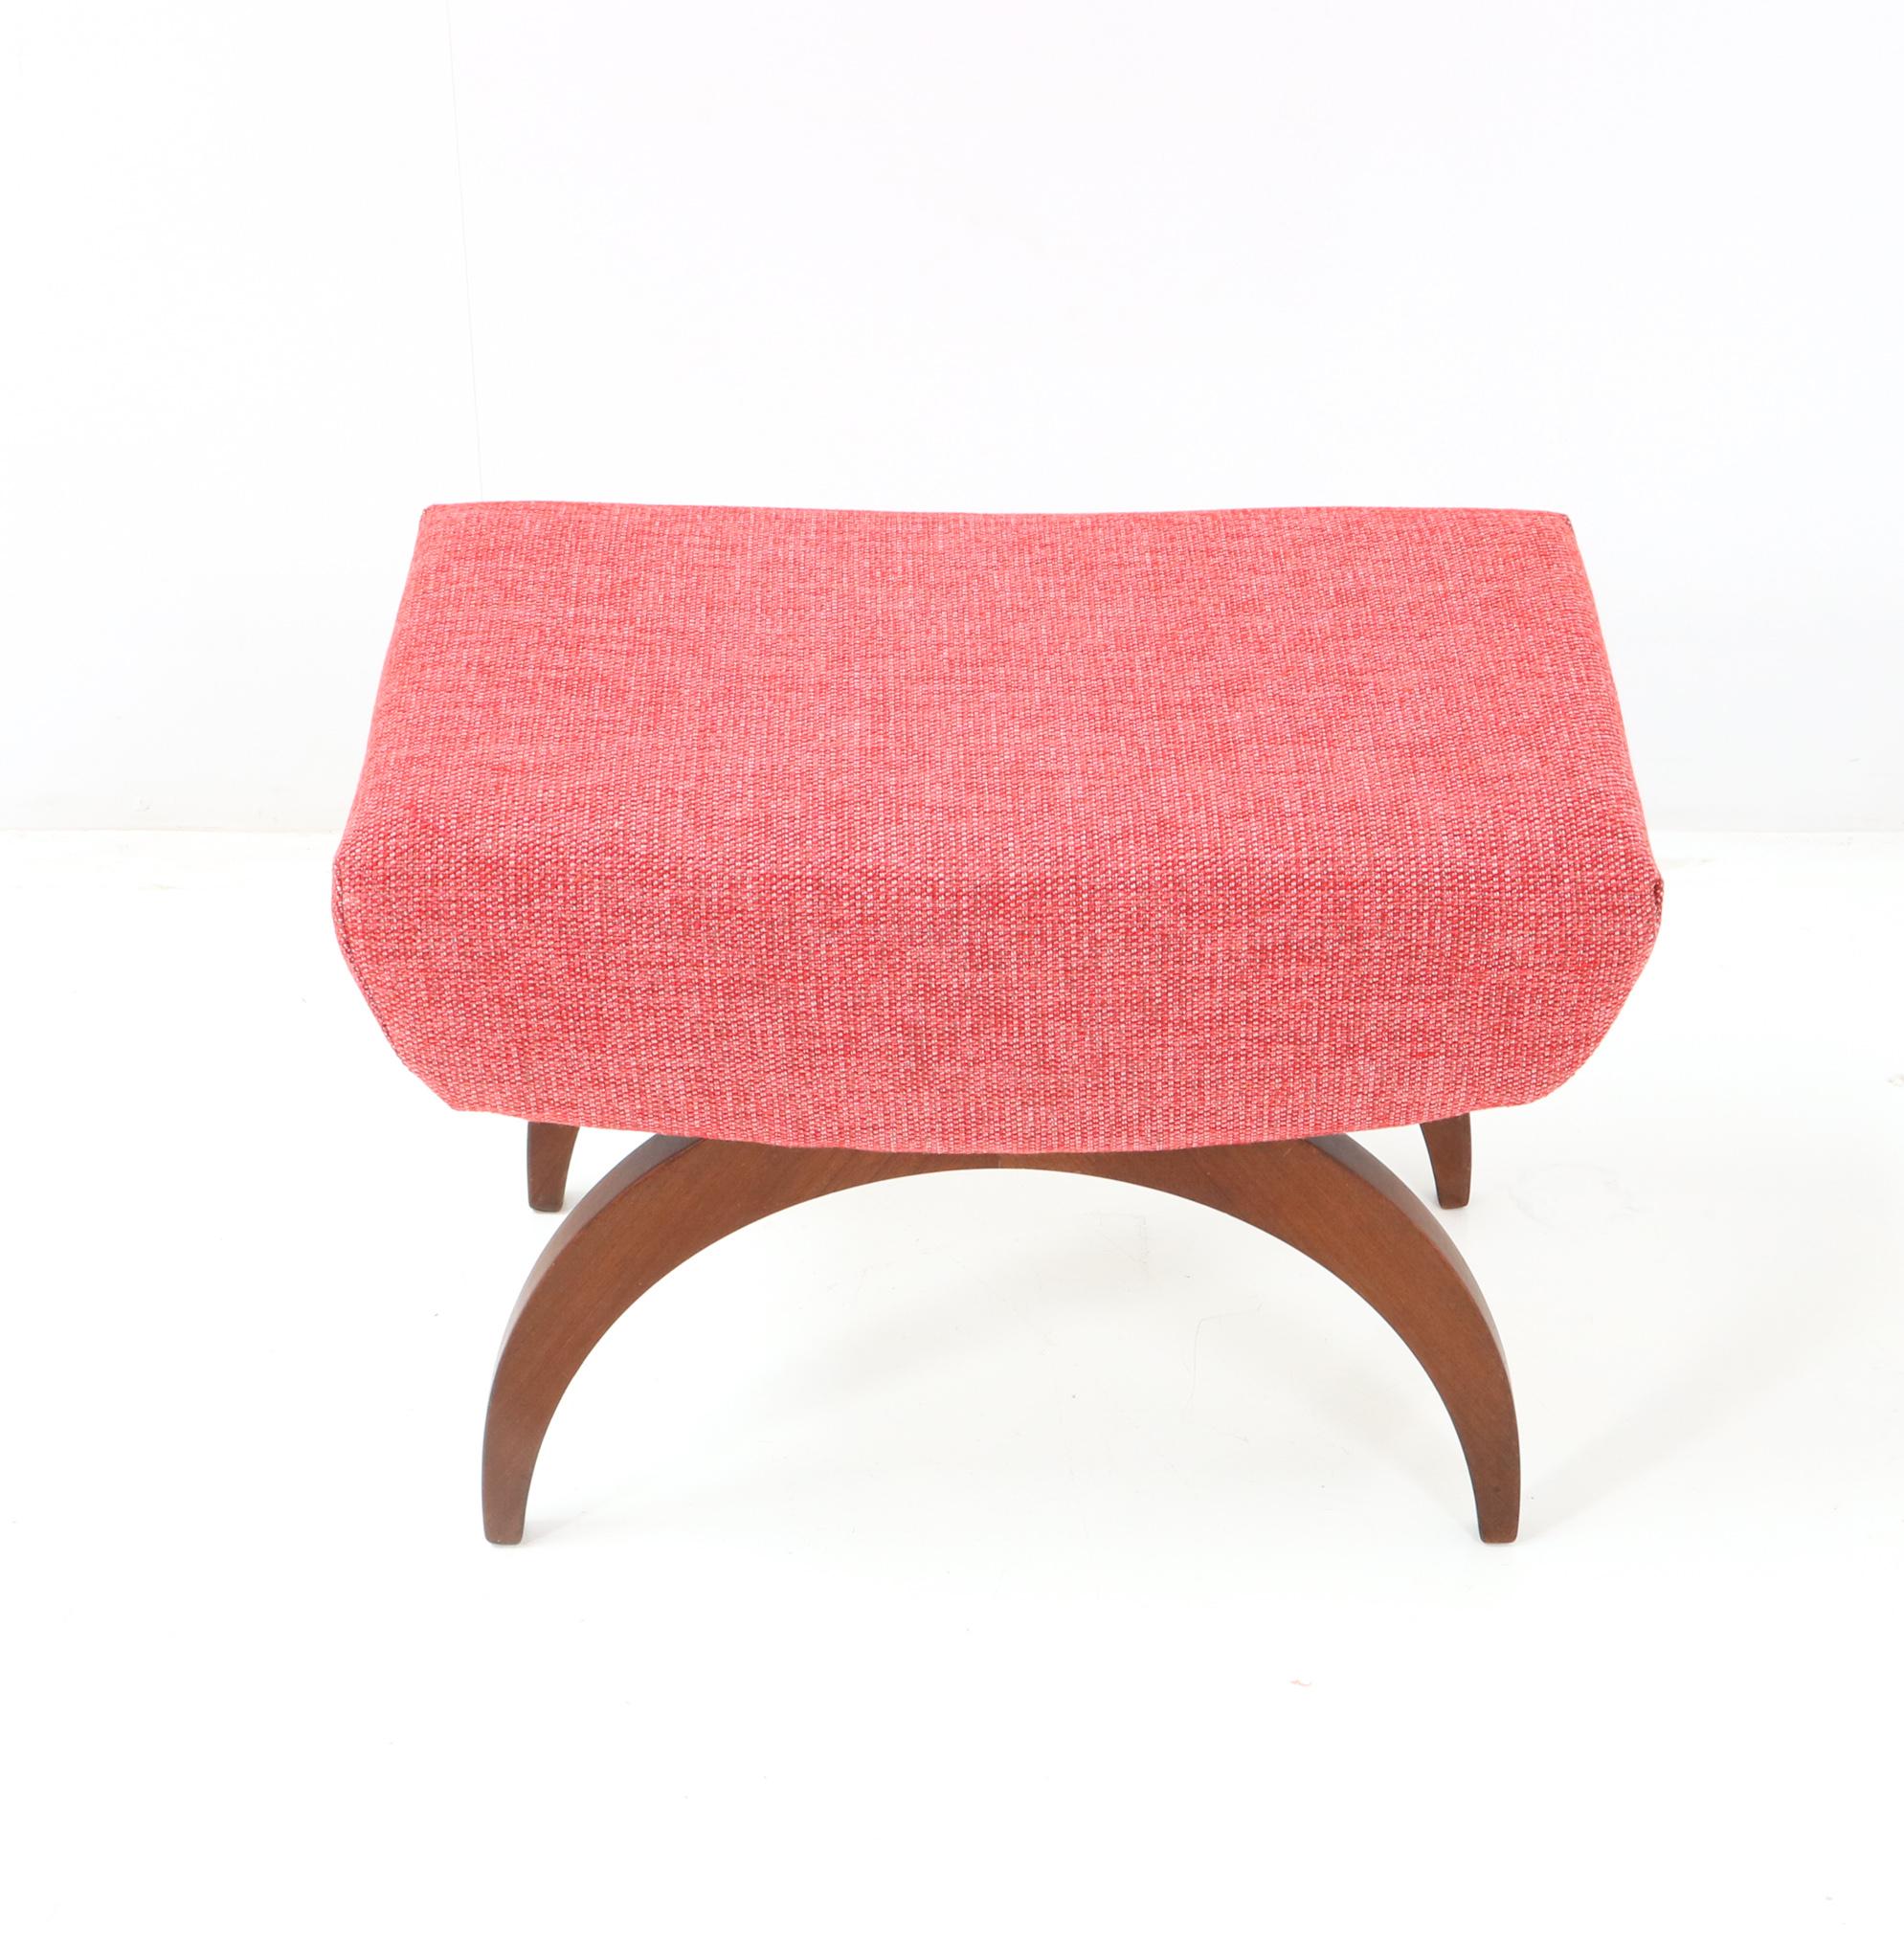 Walnut Mid-Century Modern Stool by A.A. Patijn for Zijlstra, 1950s For Sale 2